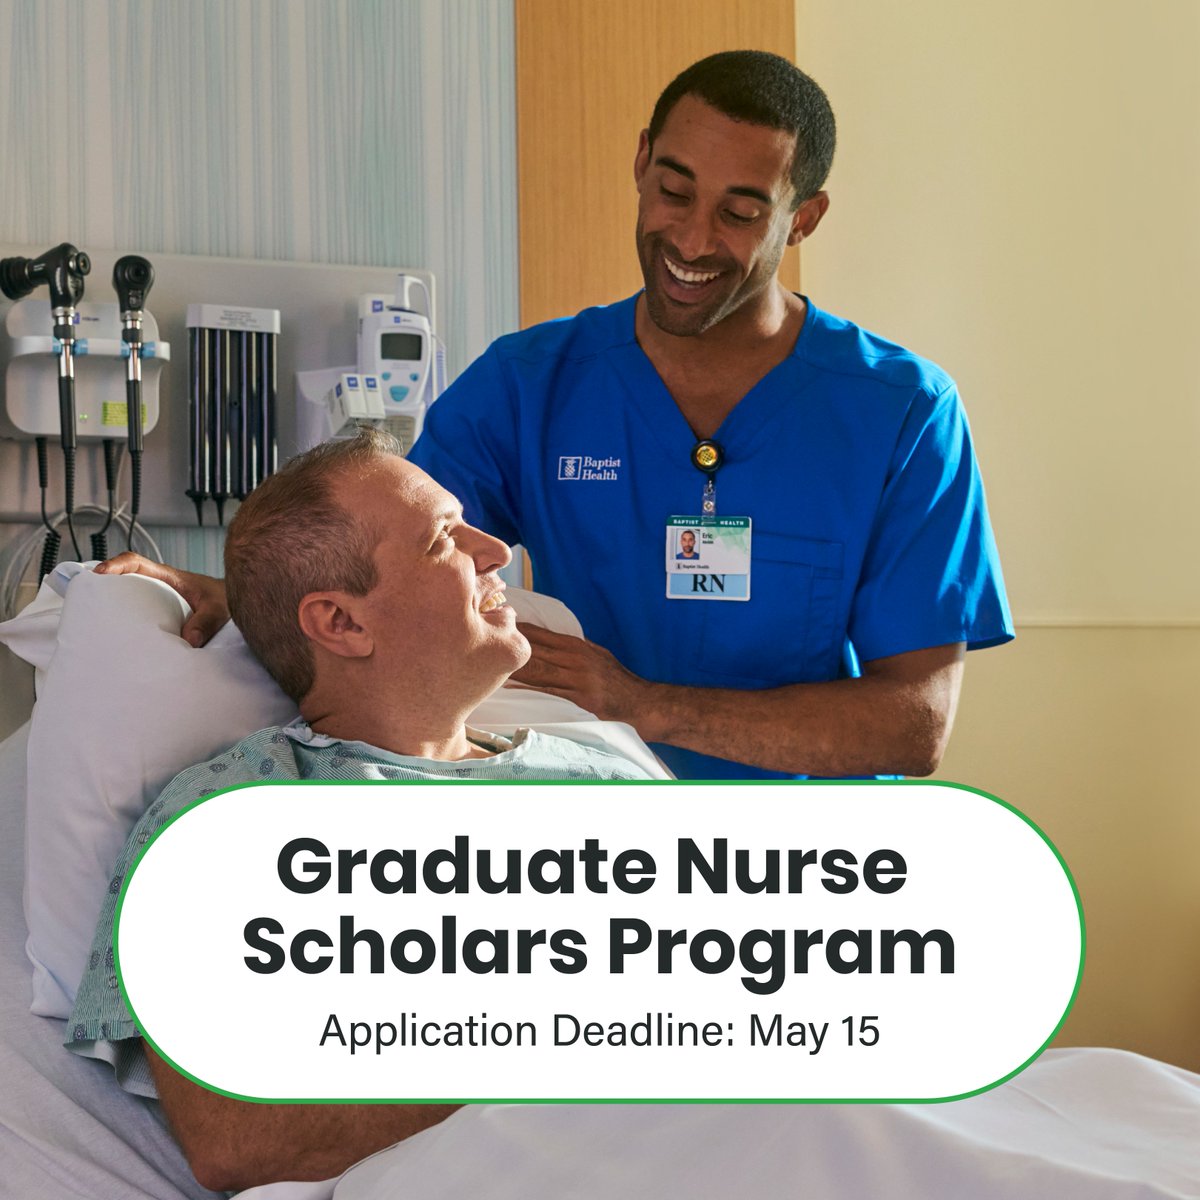 Are you a current @BaptistHealthSF nurse looking to take your career to the next level? Apply to the Graduate Nurse Scholars Program which offers scholarships for eligible registrants. Learn more! academics.baptisthealth.net/student-and-vi…